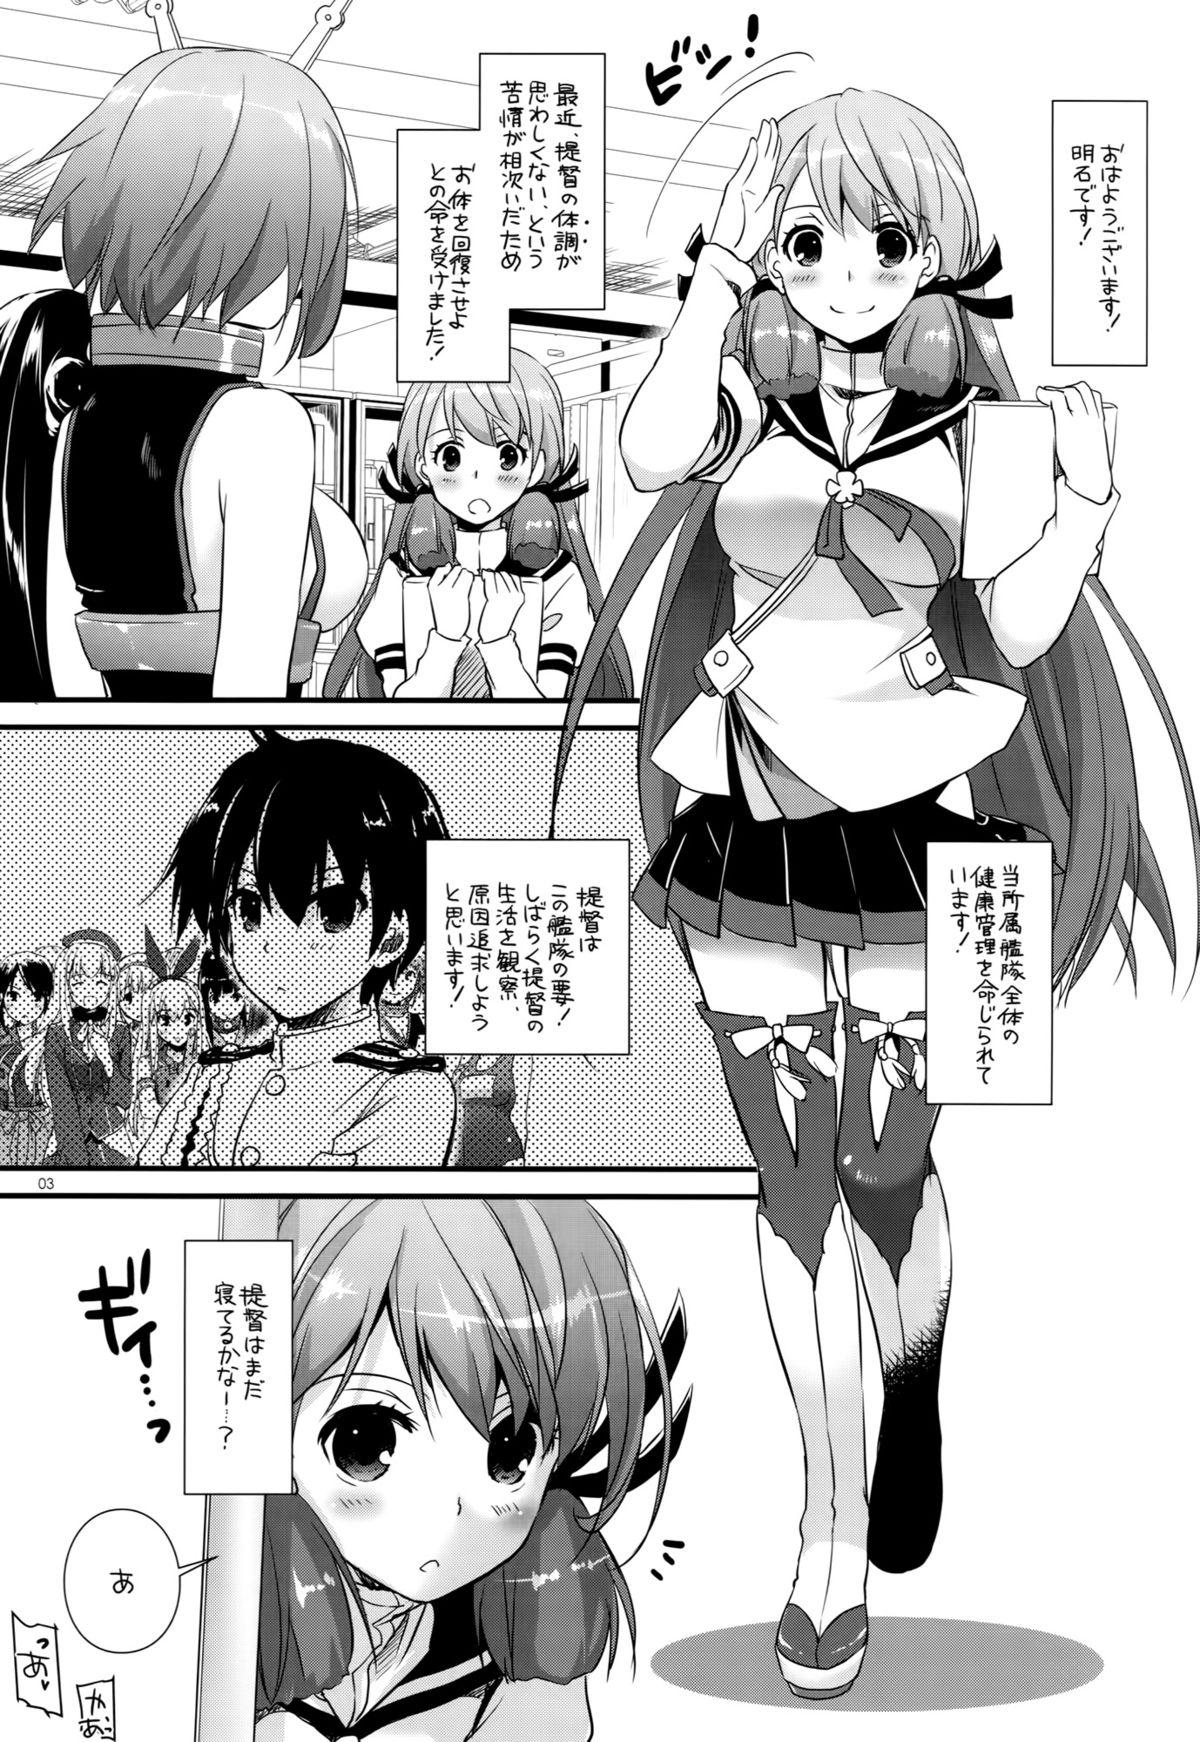 Salope D.L. action 94 - Kantai collection Wam - Page 2